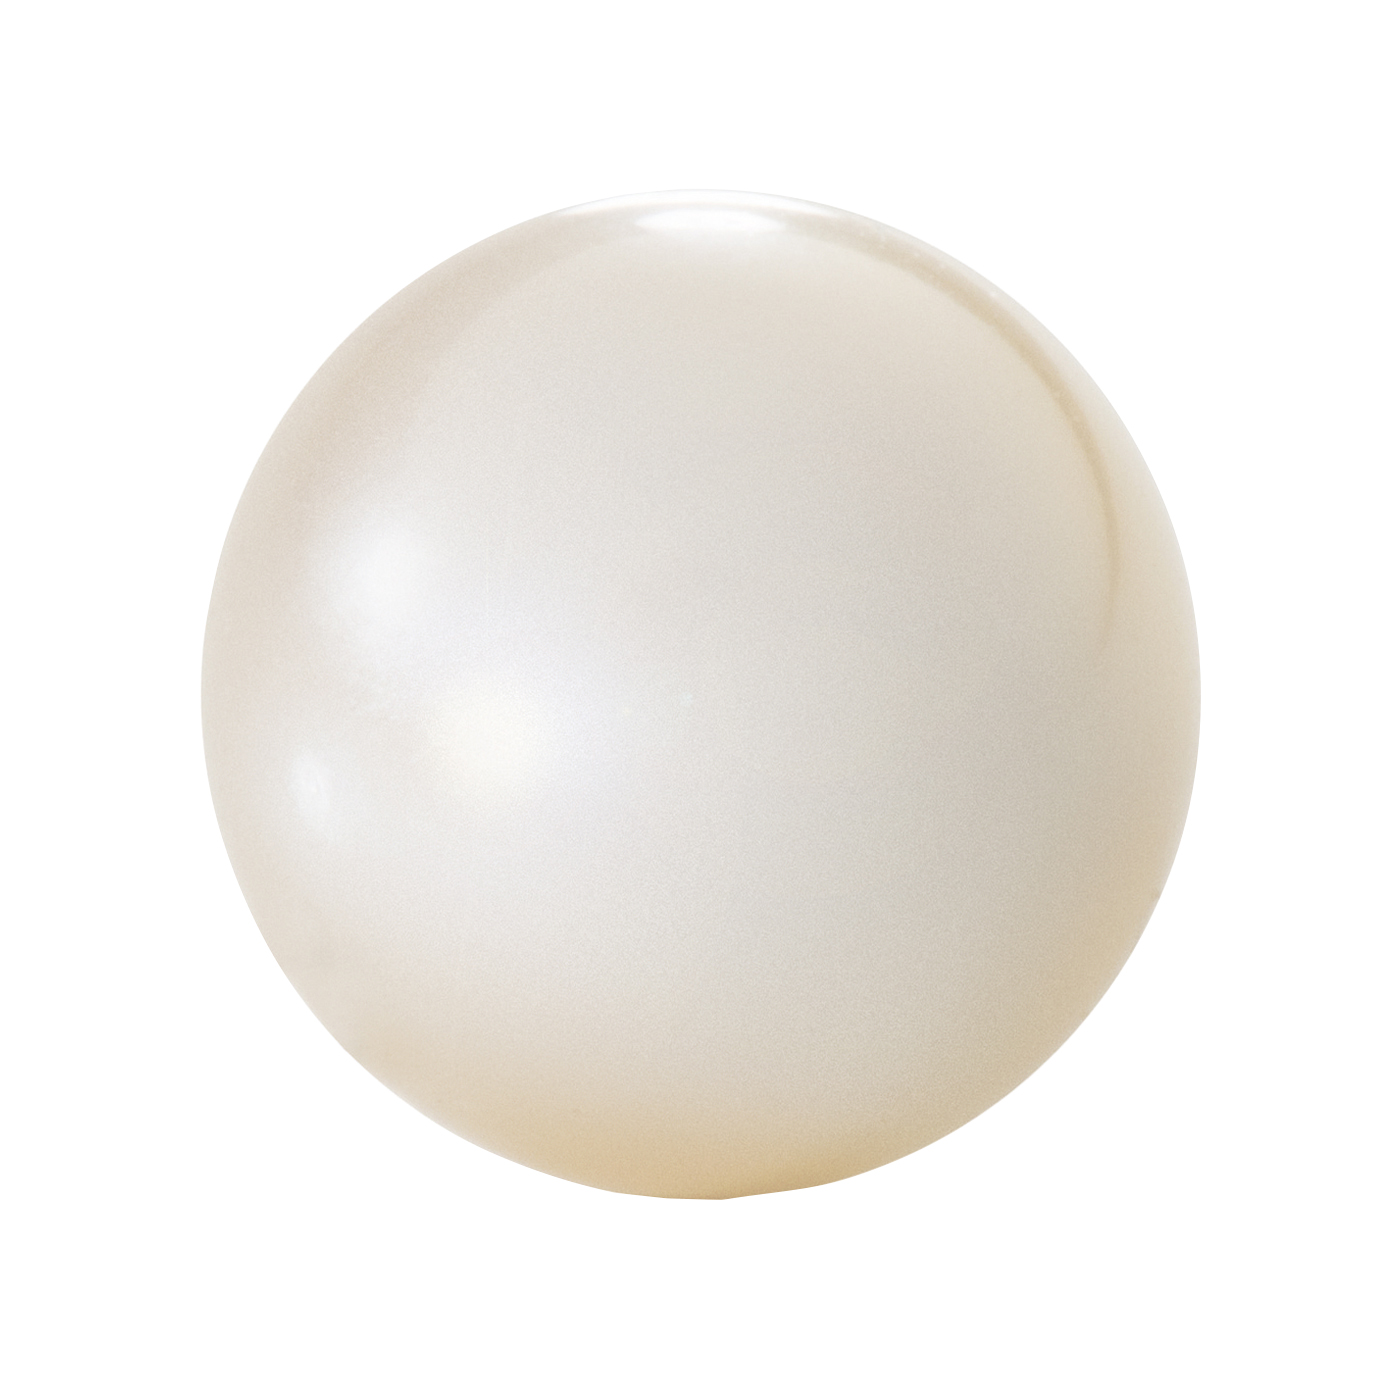 Cultured Pearl, Freshwater, 4/4, ø 7.5-8.0 mm, White - 1 piece